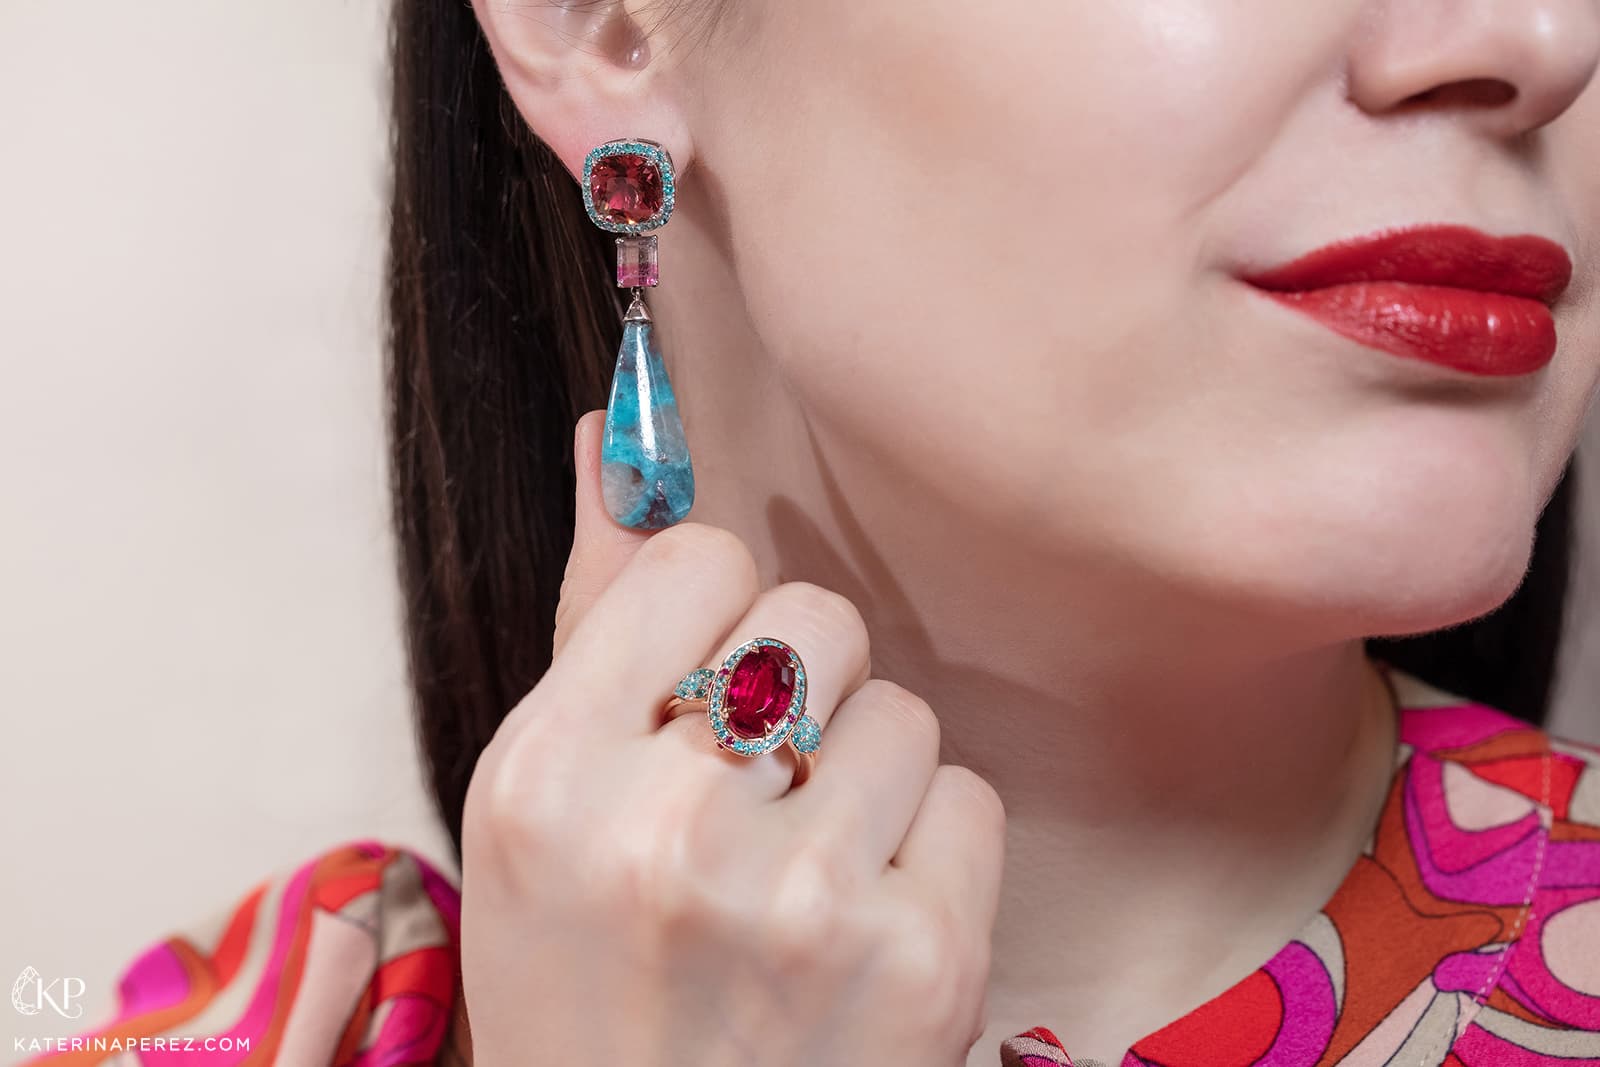 Graziela Gems earrings with 24.30ct Paraiba tourmaline, watermelon tourmaline and rubellite, and ring with 5.60ct rubellite and 0.65ct Paraiba tourmaline in yellow gold